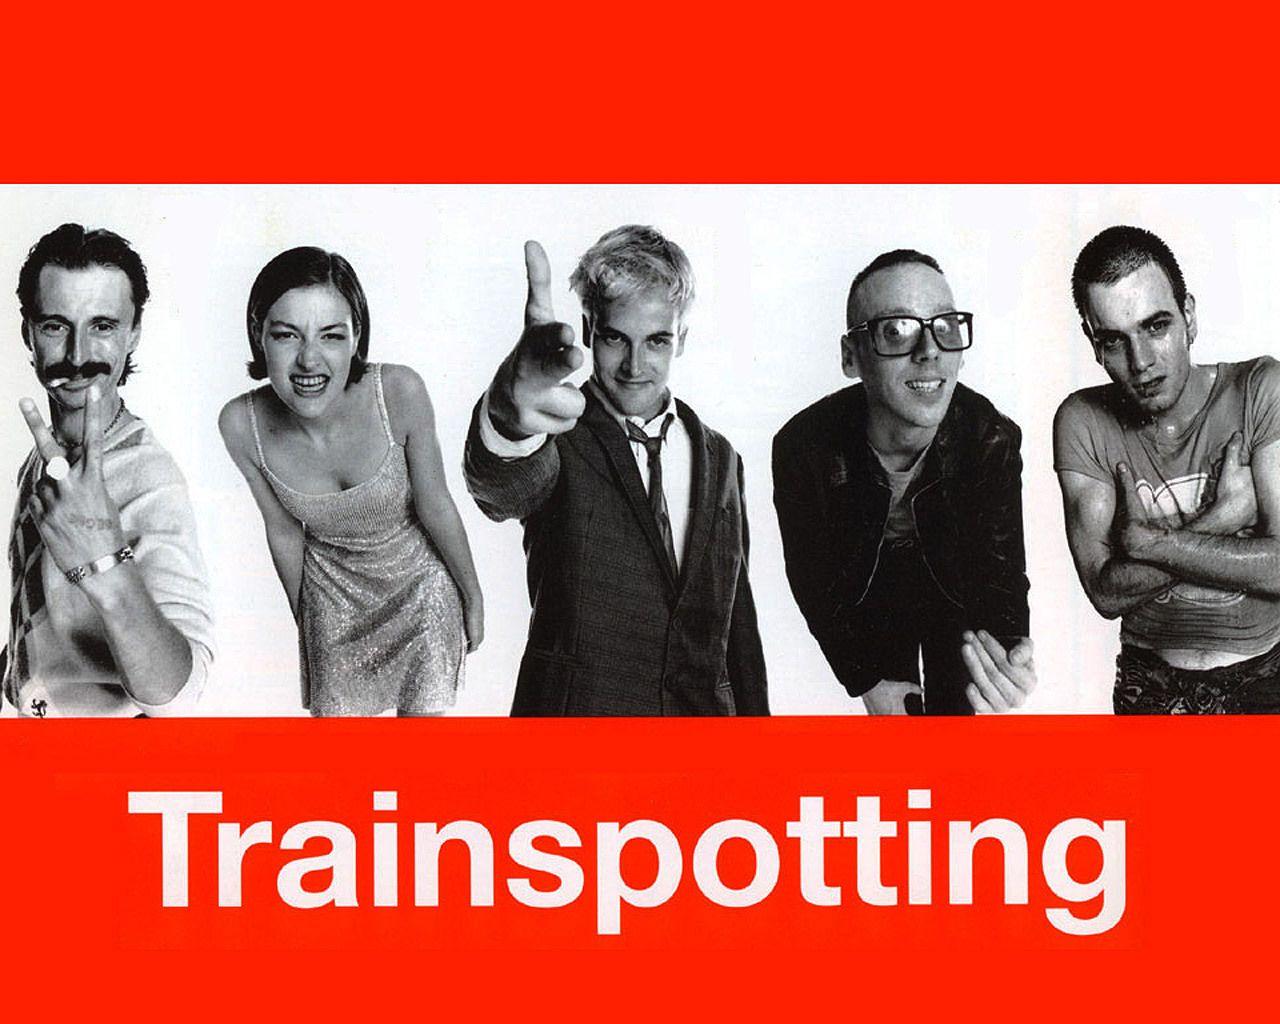 Trainspotting image Trainspotting HD wallpaper and background